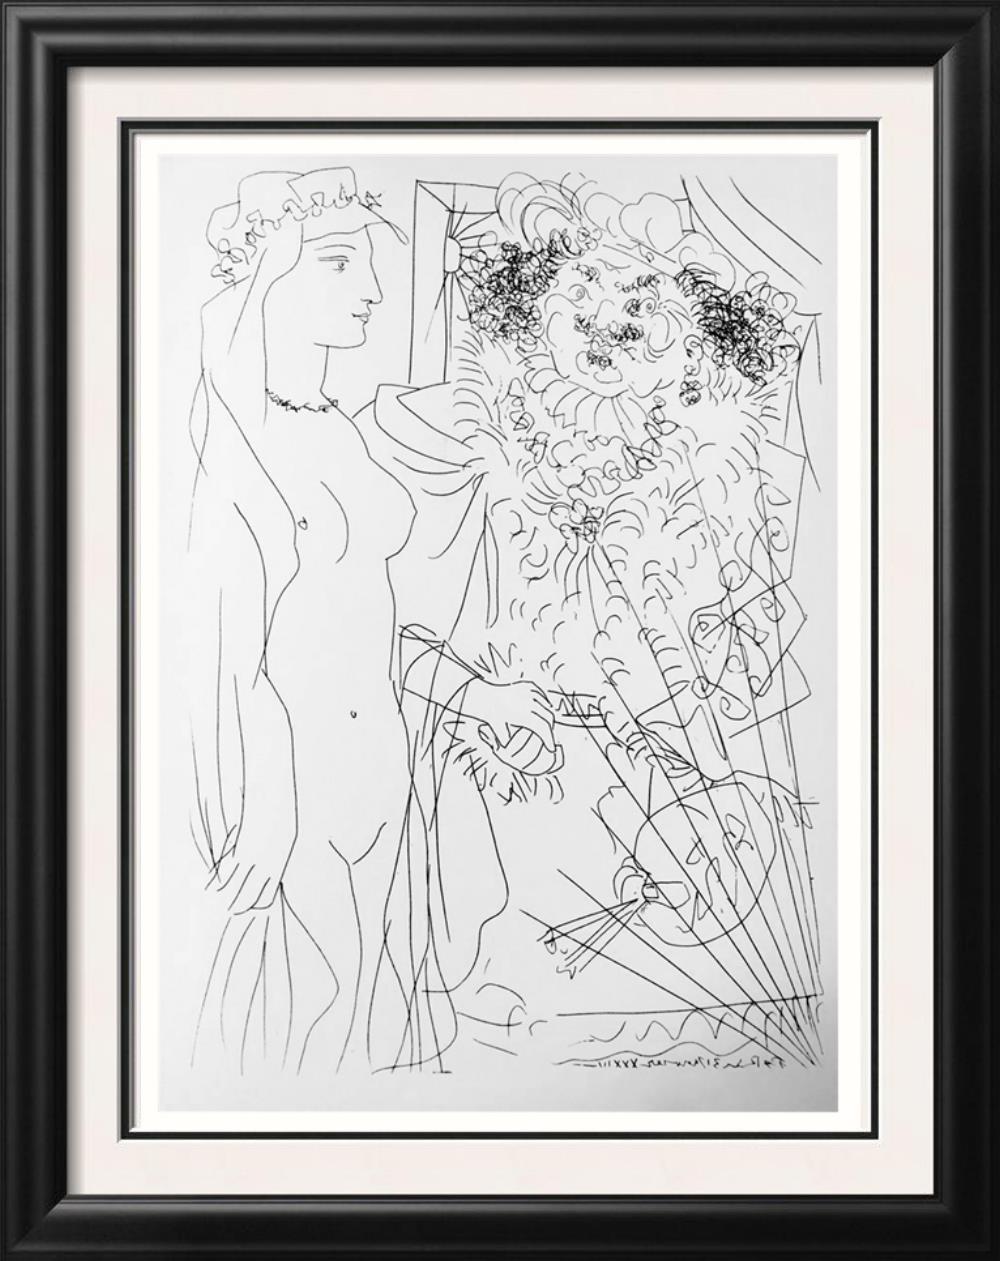 Pablo Picasso Nude and Self-Portrait of Rembrandt c. 1933 Fine Art Print from Museum Artist